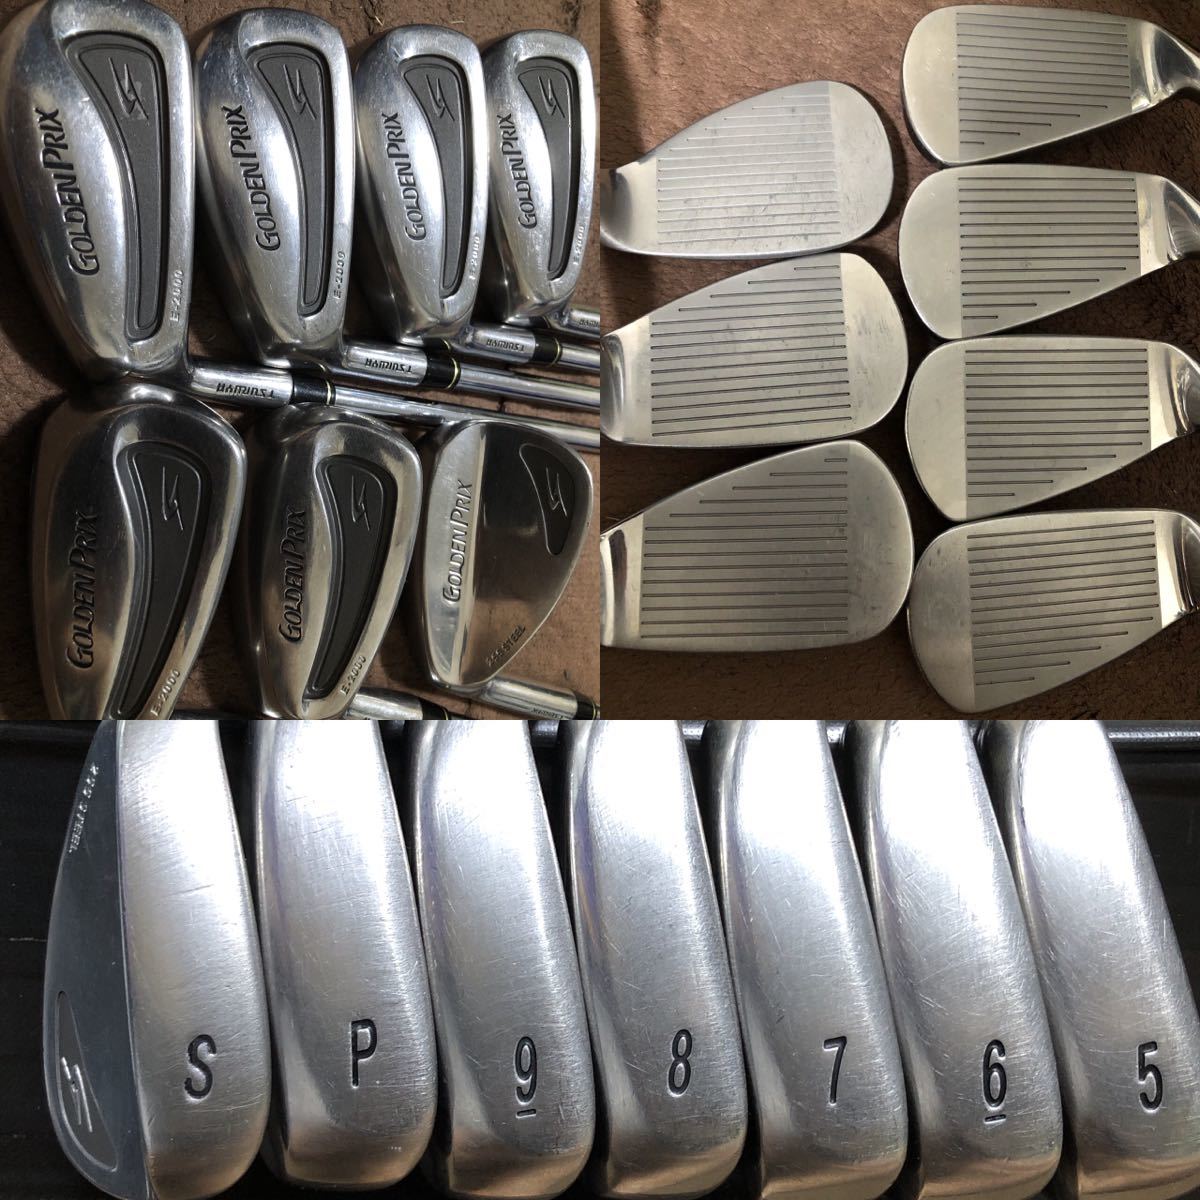 . promo Dell * gorgeous TaylorMade /tsuruya[S] full set * strongest Athlete height performance firmly practice do skillful . becomes want beginner . most recommended!